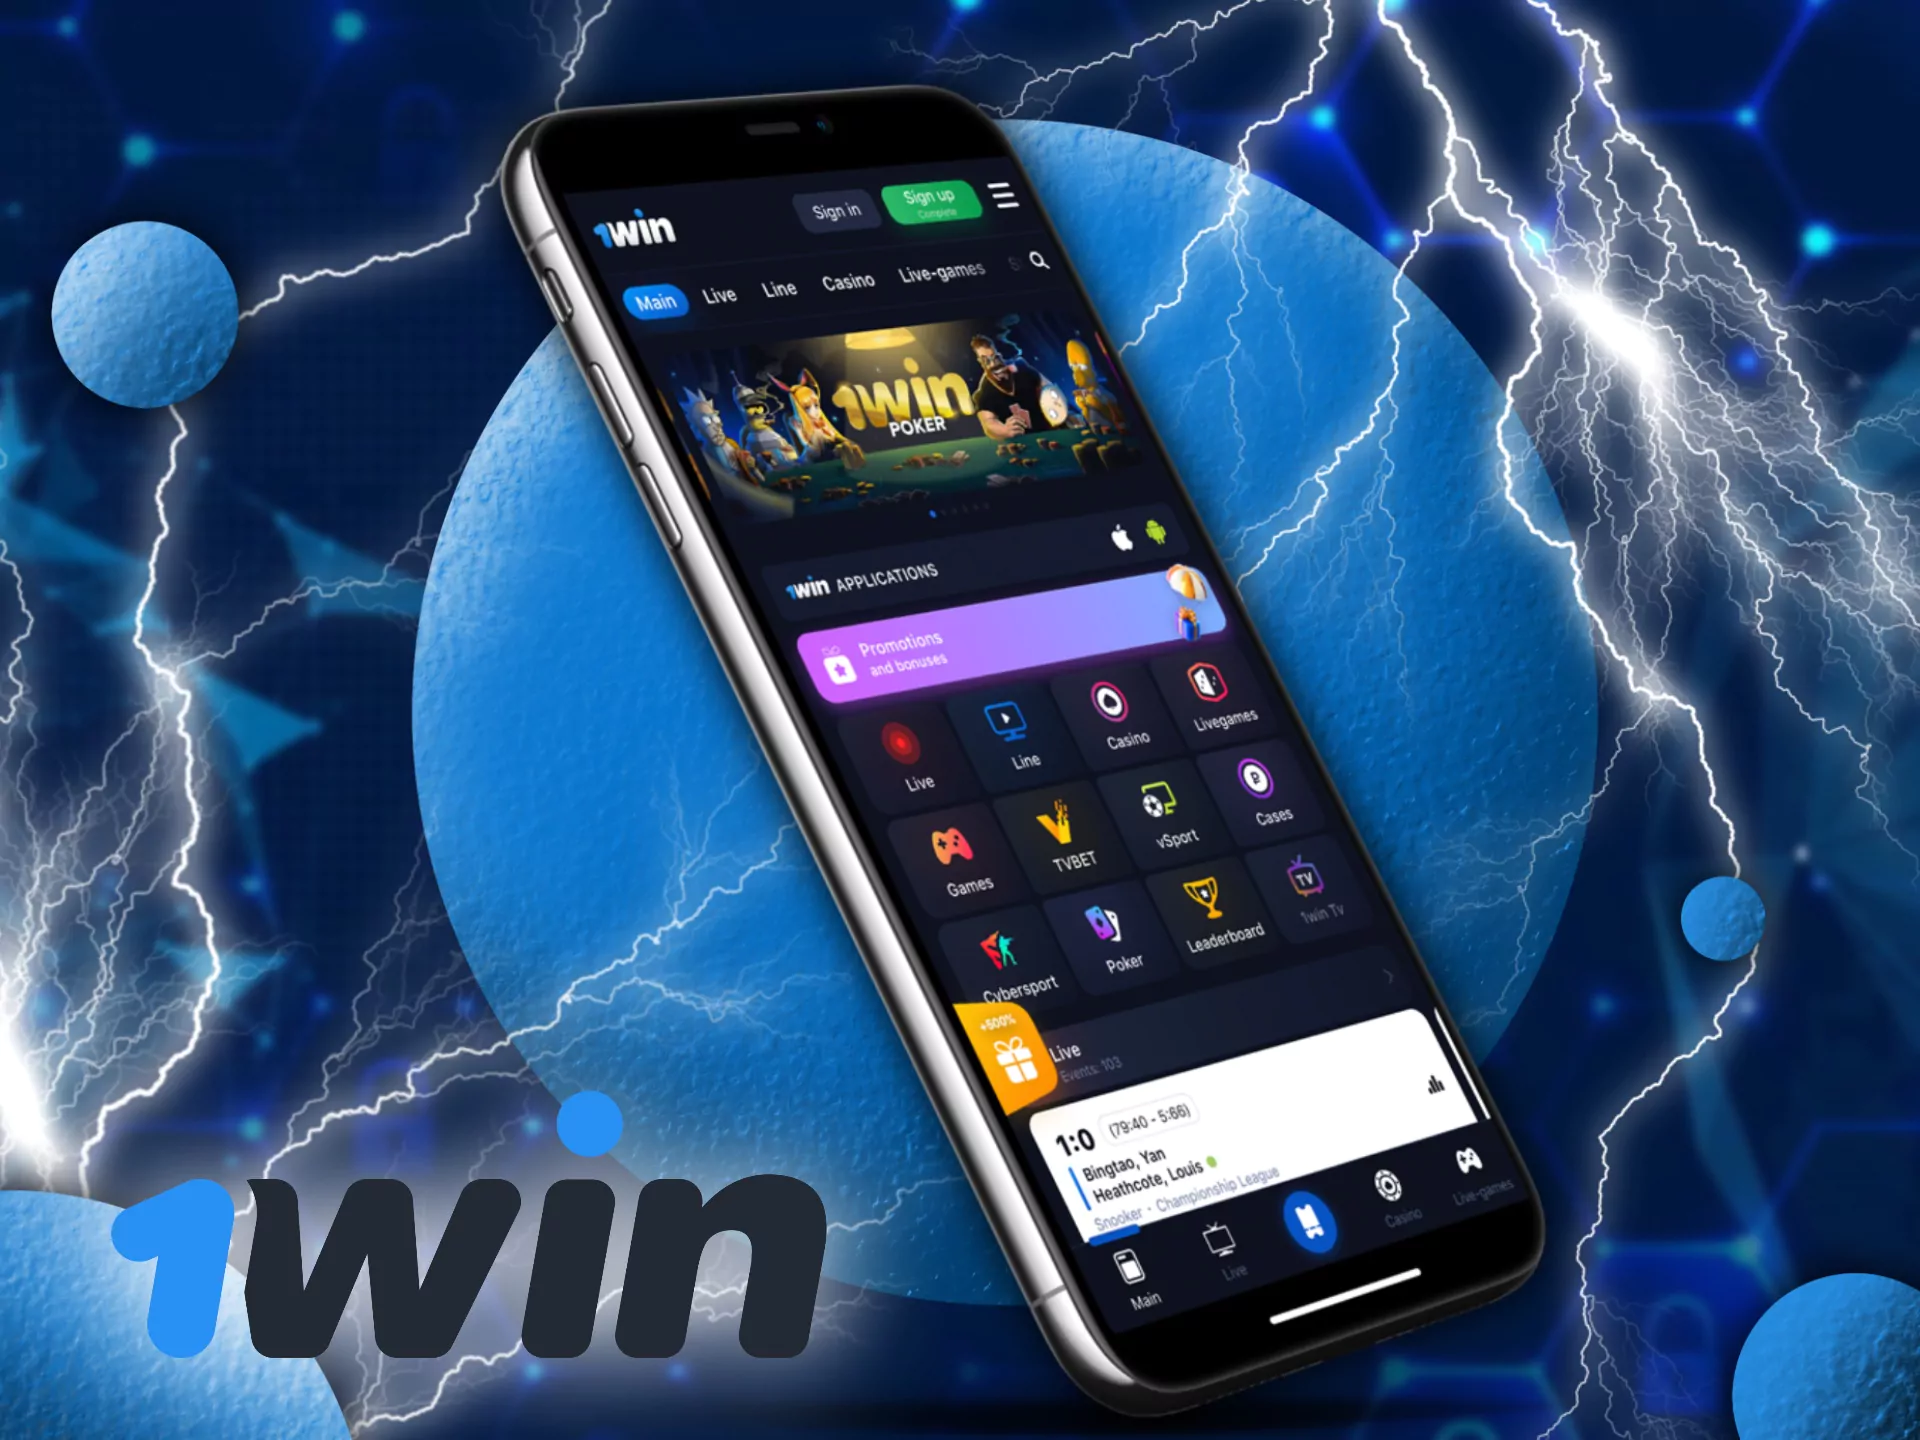 The 1Win mobile app has great conditionals for its users and some welcome bonuses.